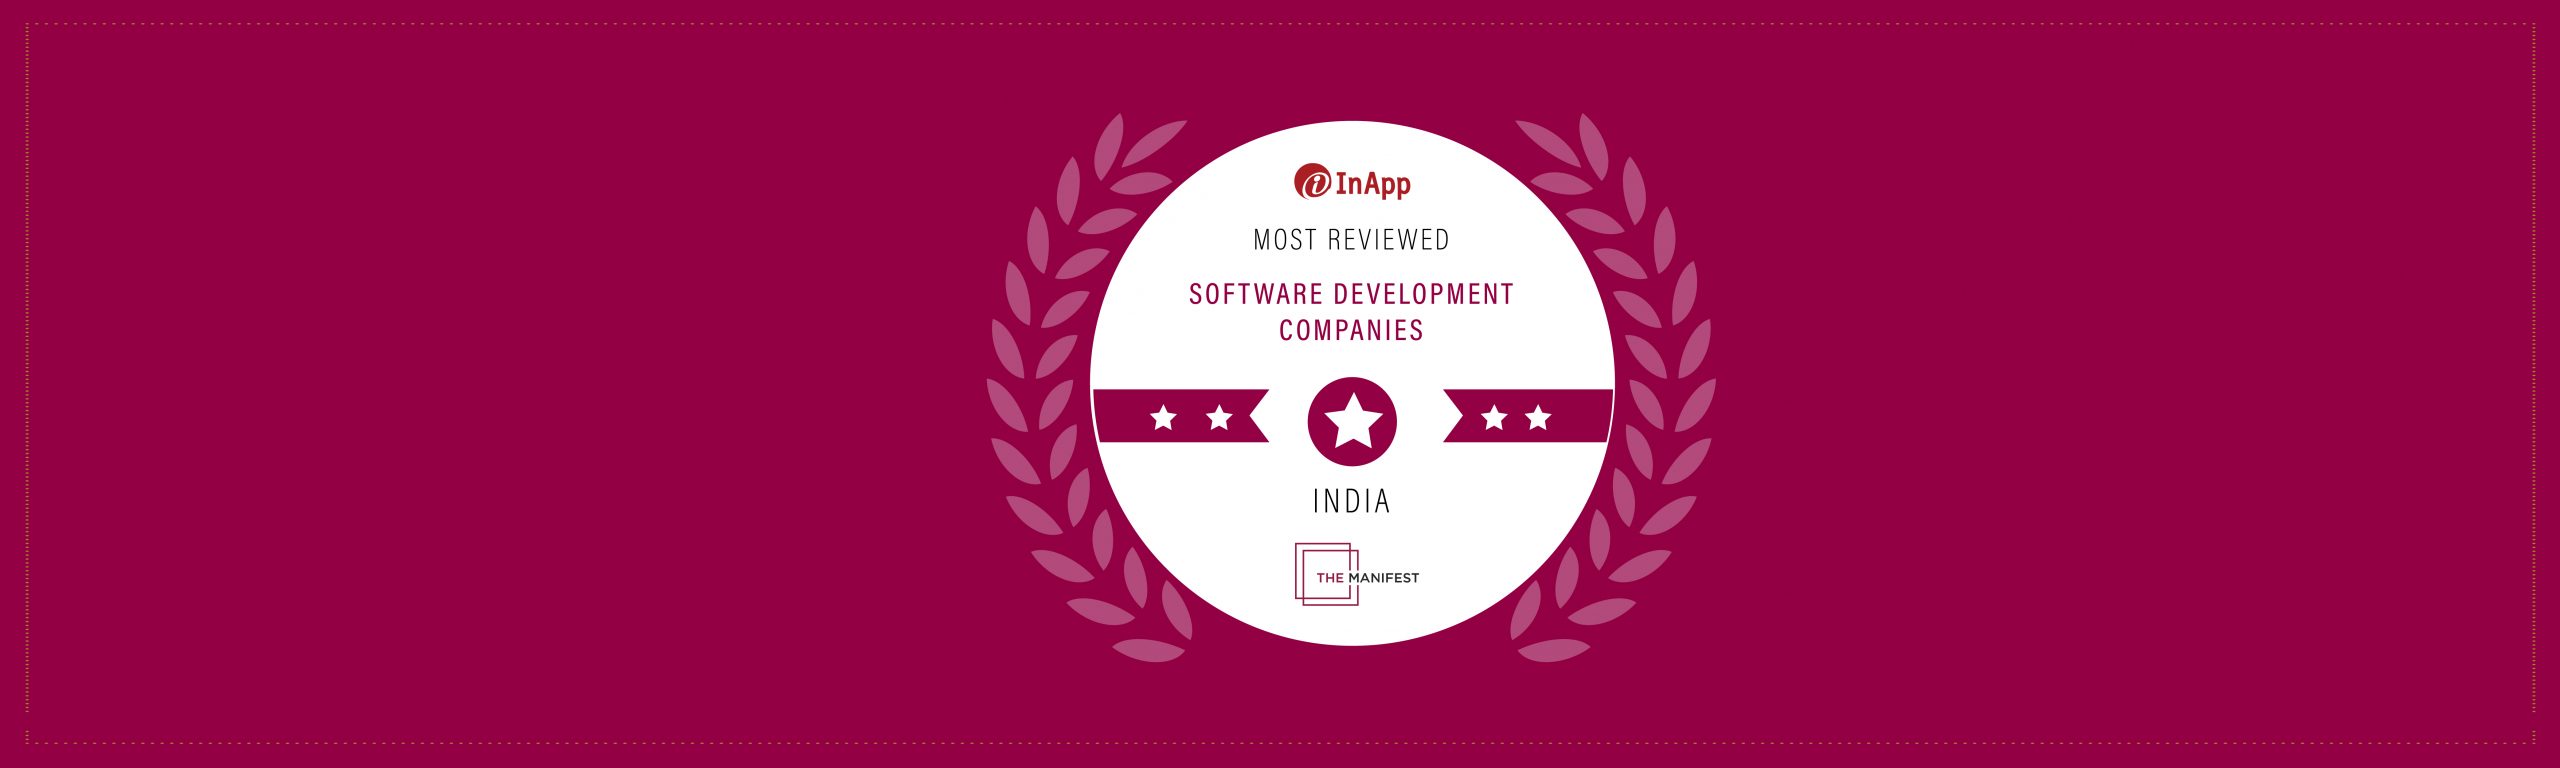 InApp Named as India's Most Recommended Software Developer for 2021 by The Manifest - Internal